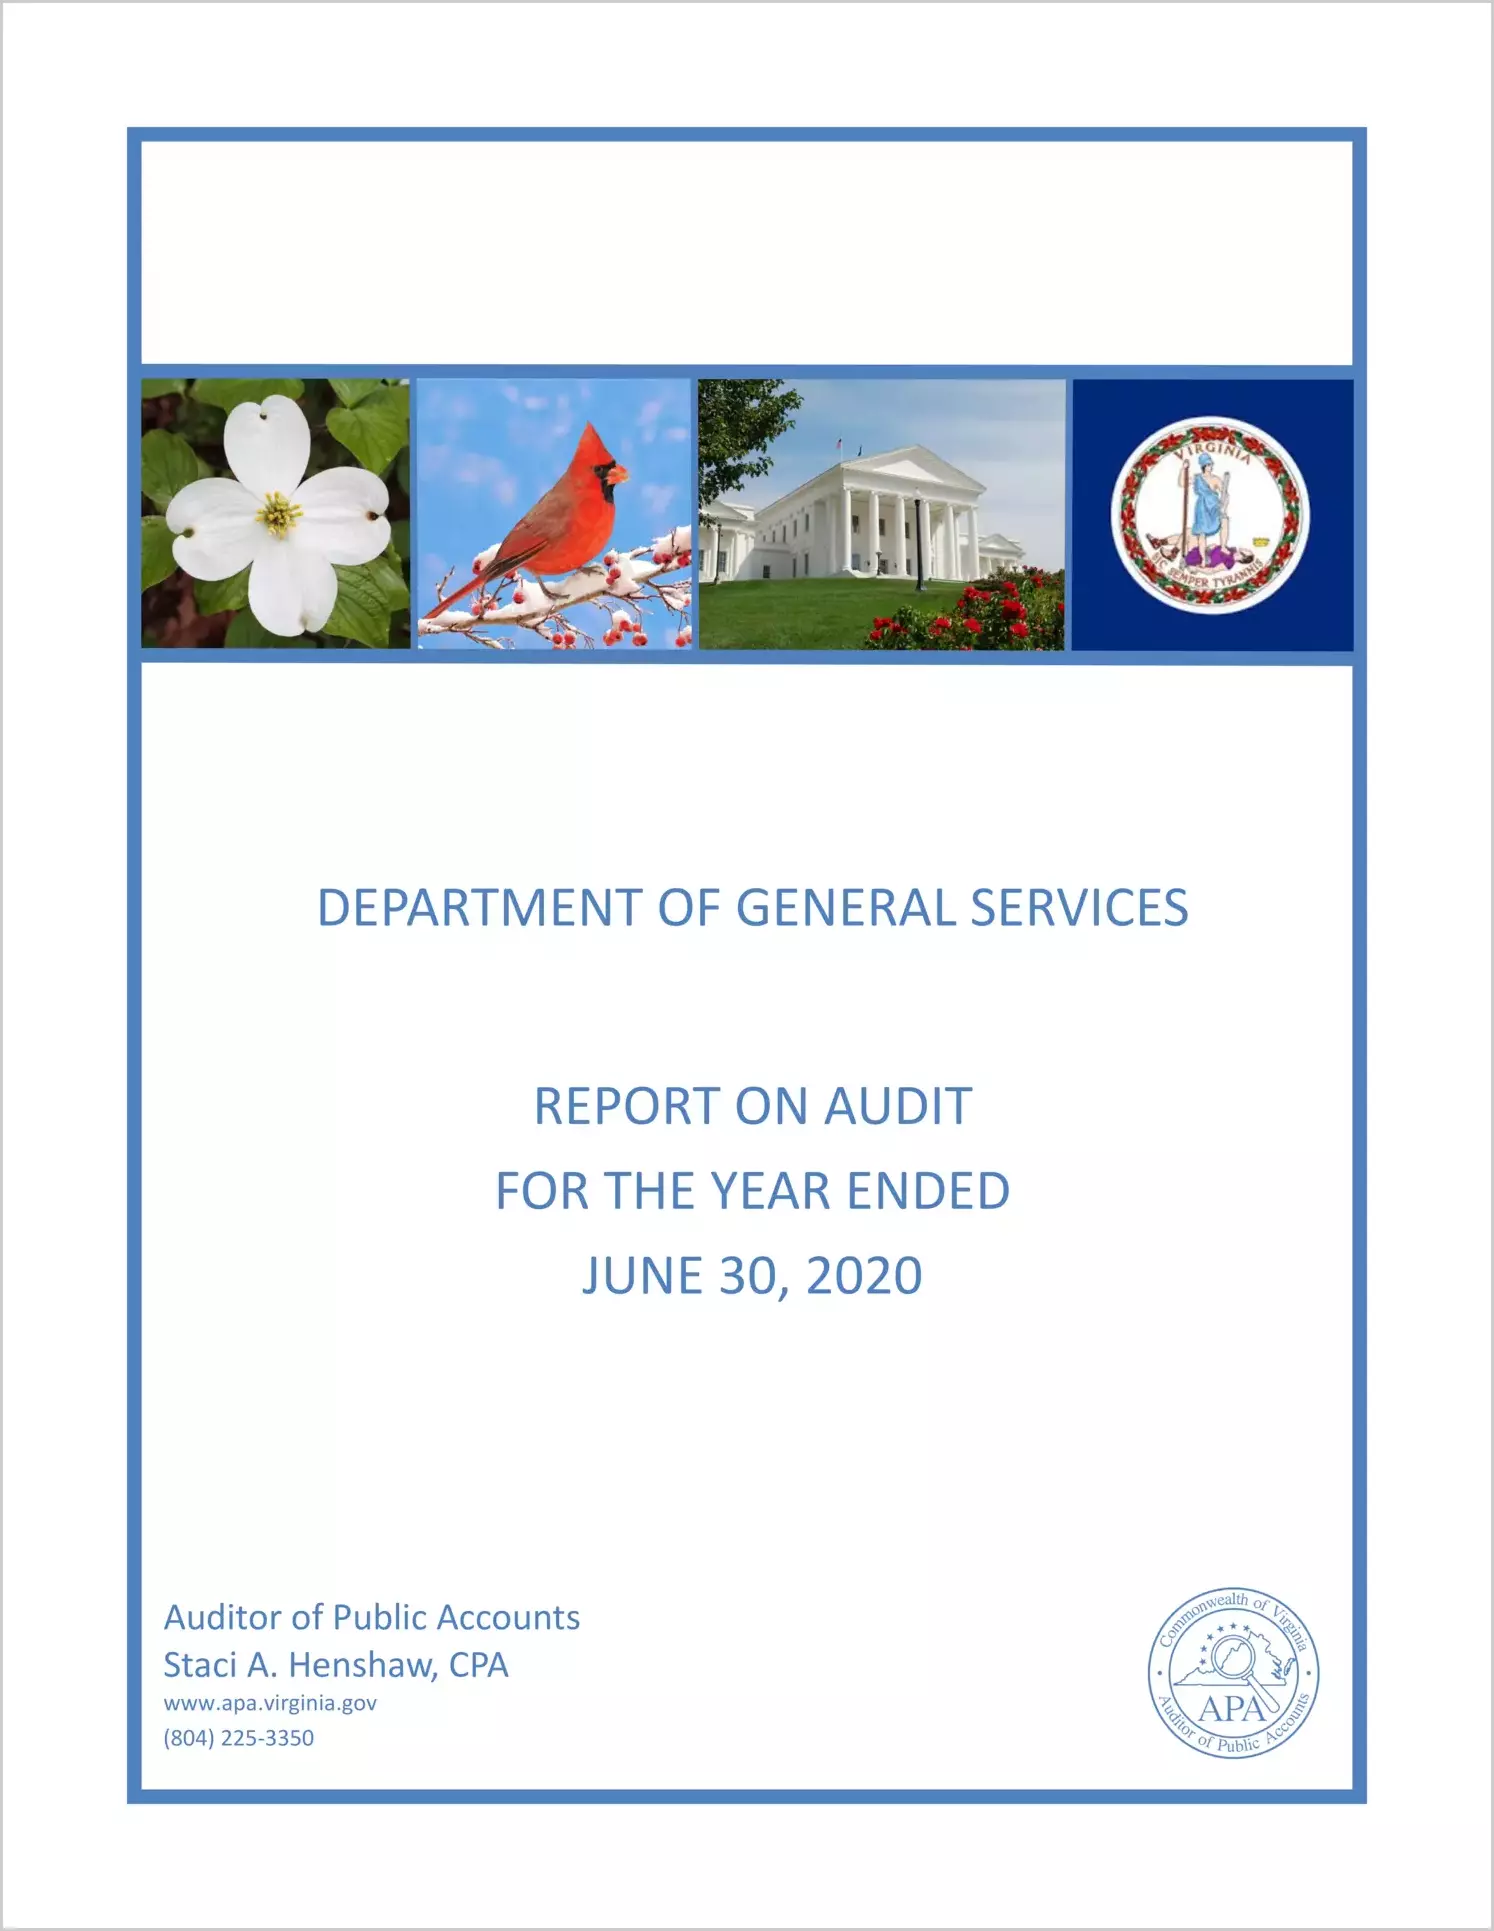 Department of General Services for the year ended June 30, 2020